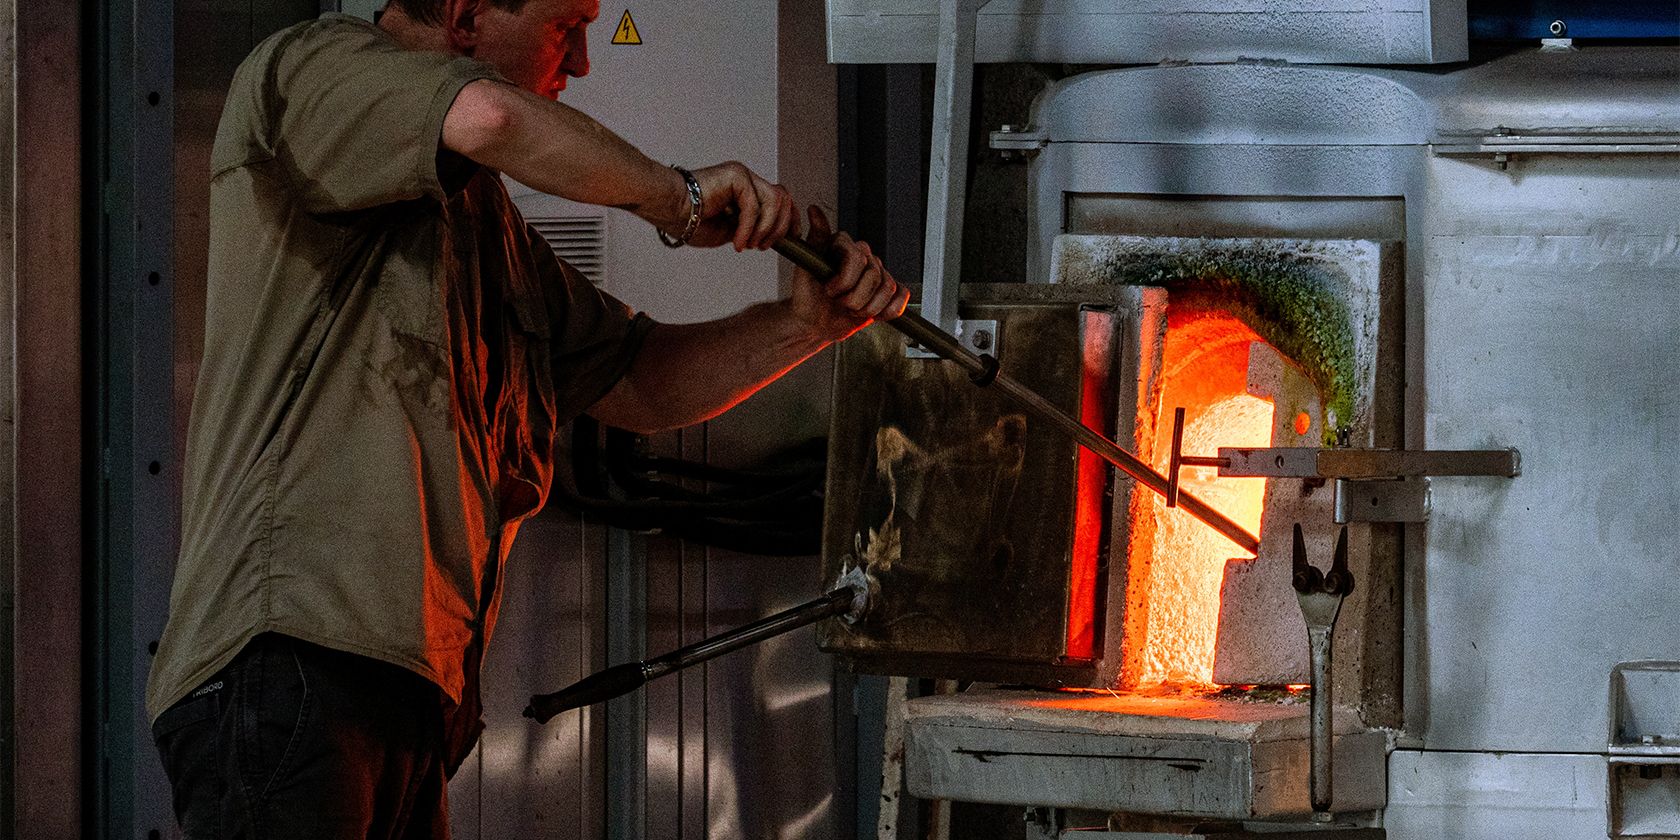 Glass Worker working with a glass furnace